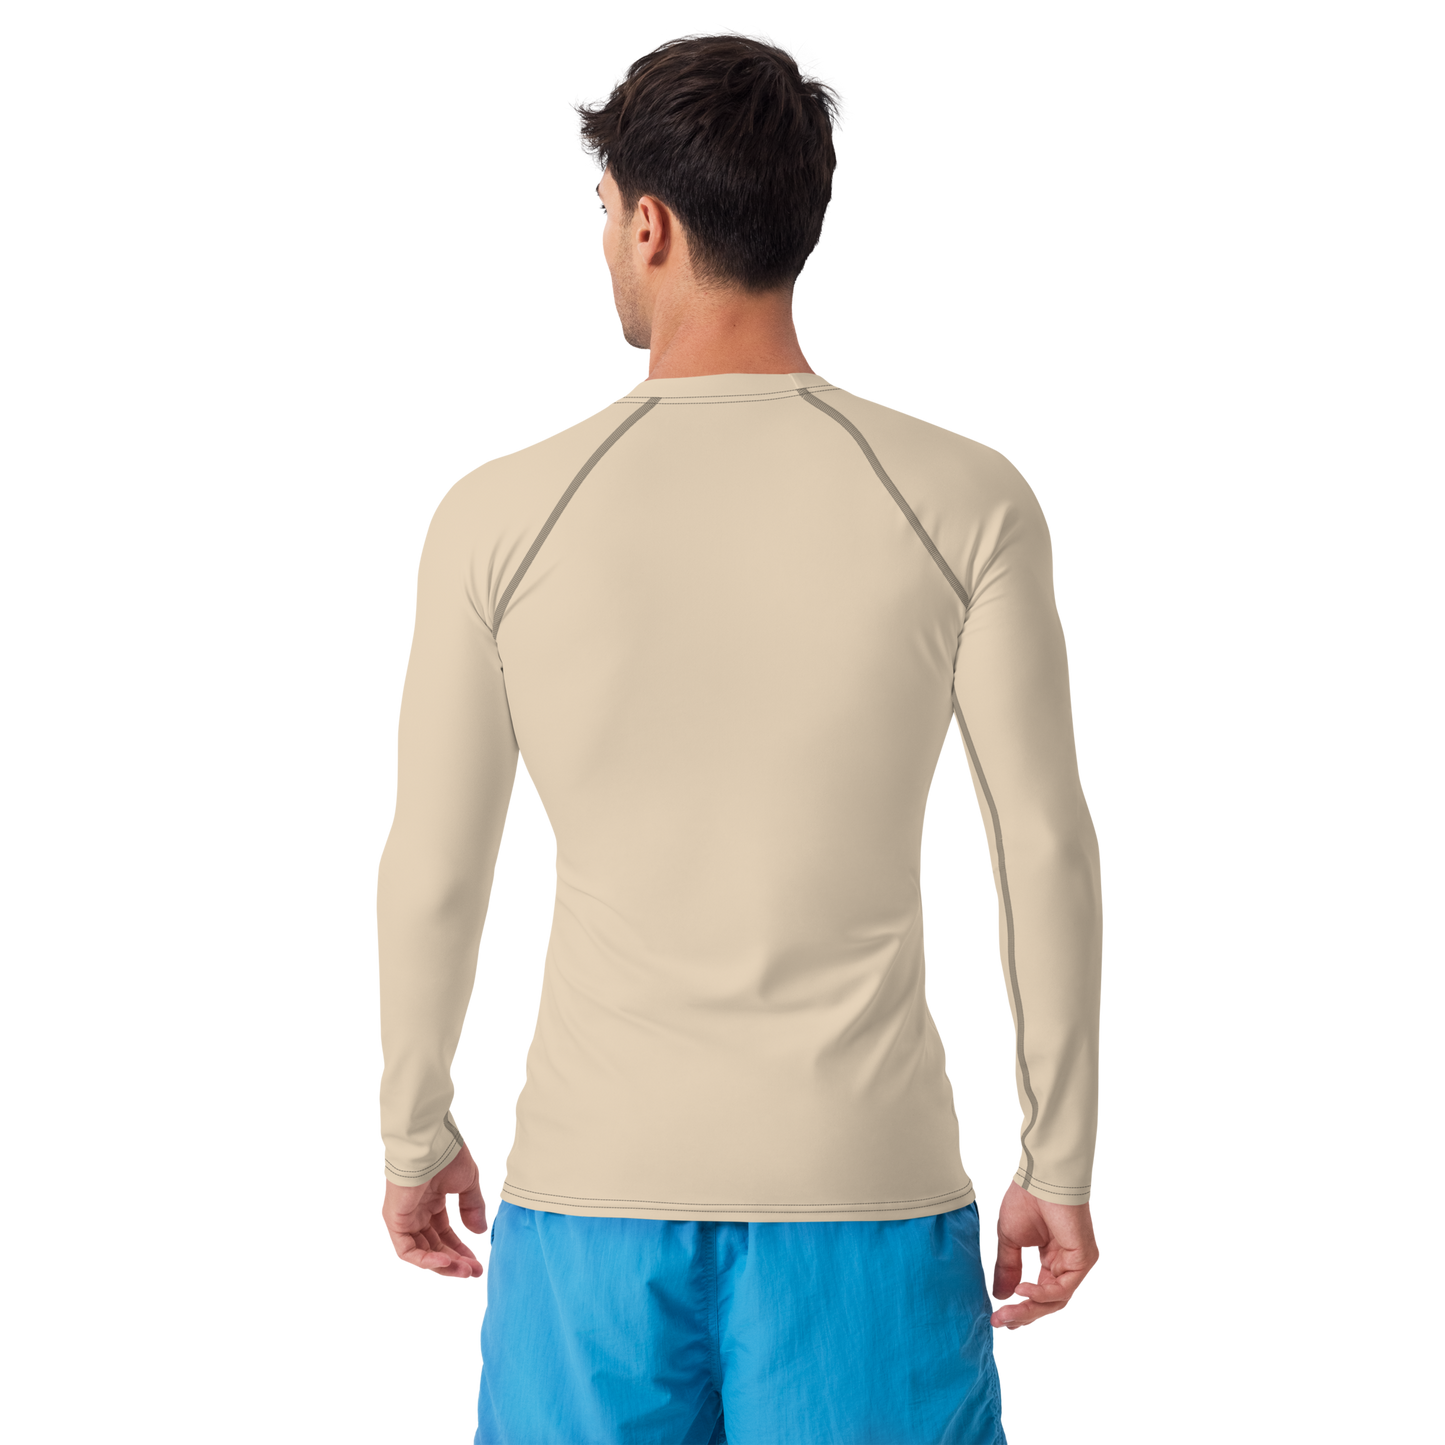 Long sleeve compression